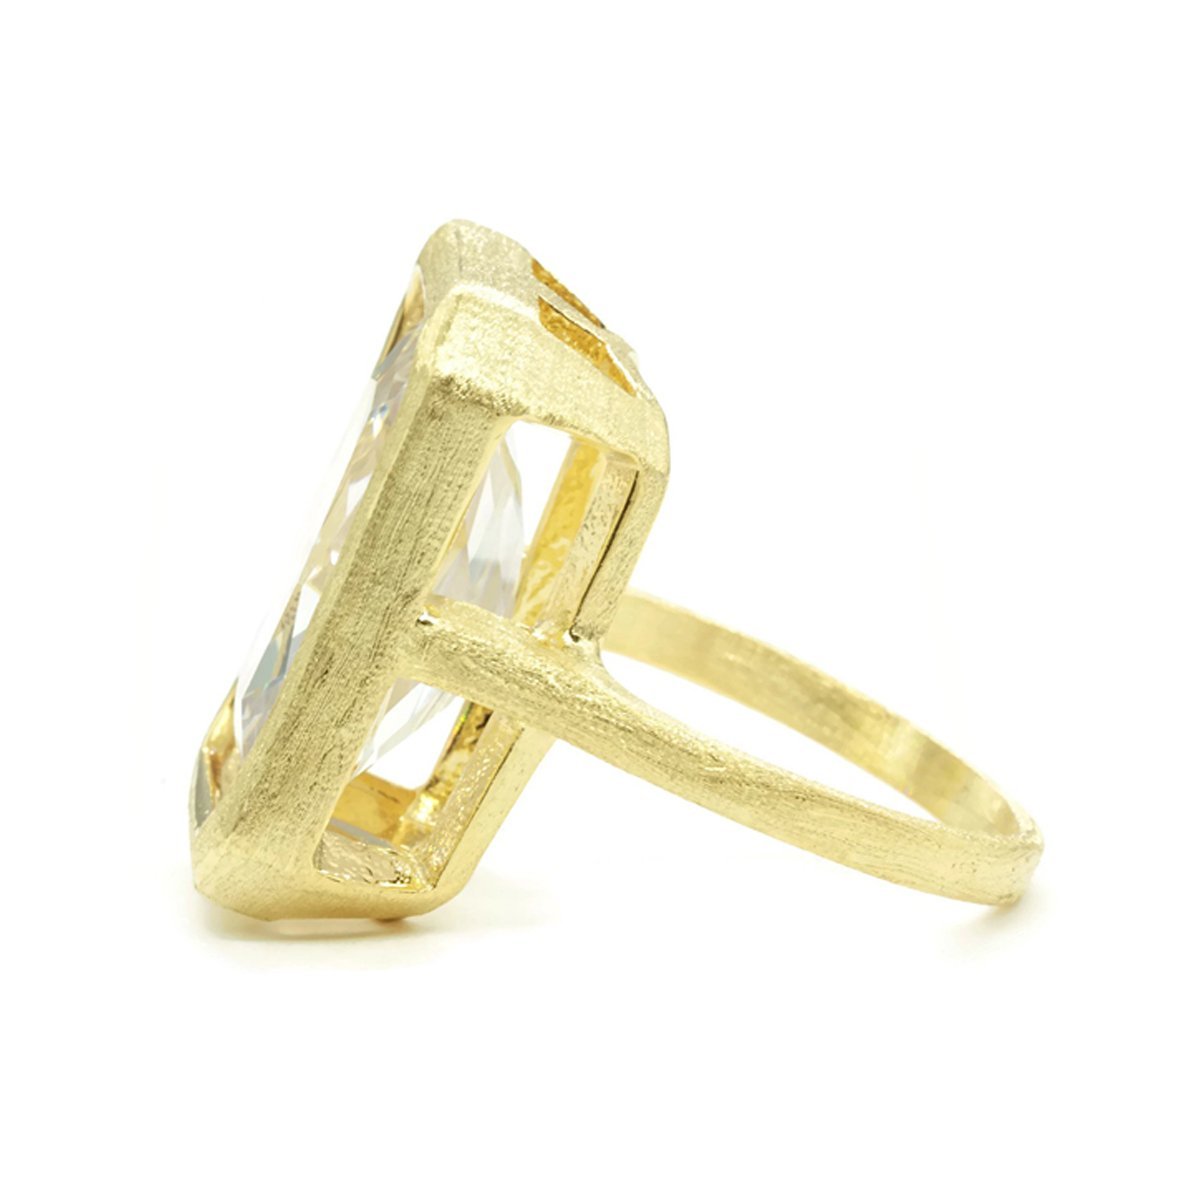 Emerald Cut Clear Cubic Zirconia Stone Ring - Brushed Gold Finish - 14kt Gold Electroplate - Statement Jewelry Bijou Her